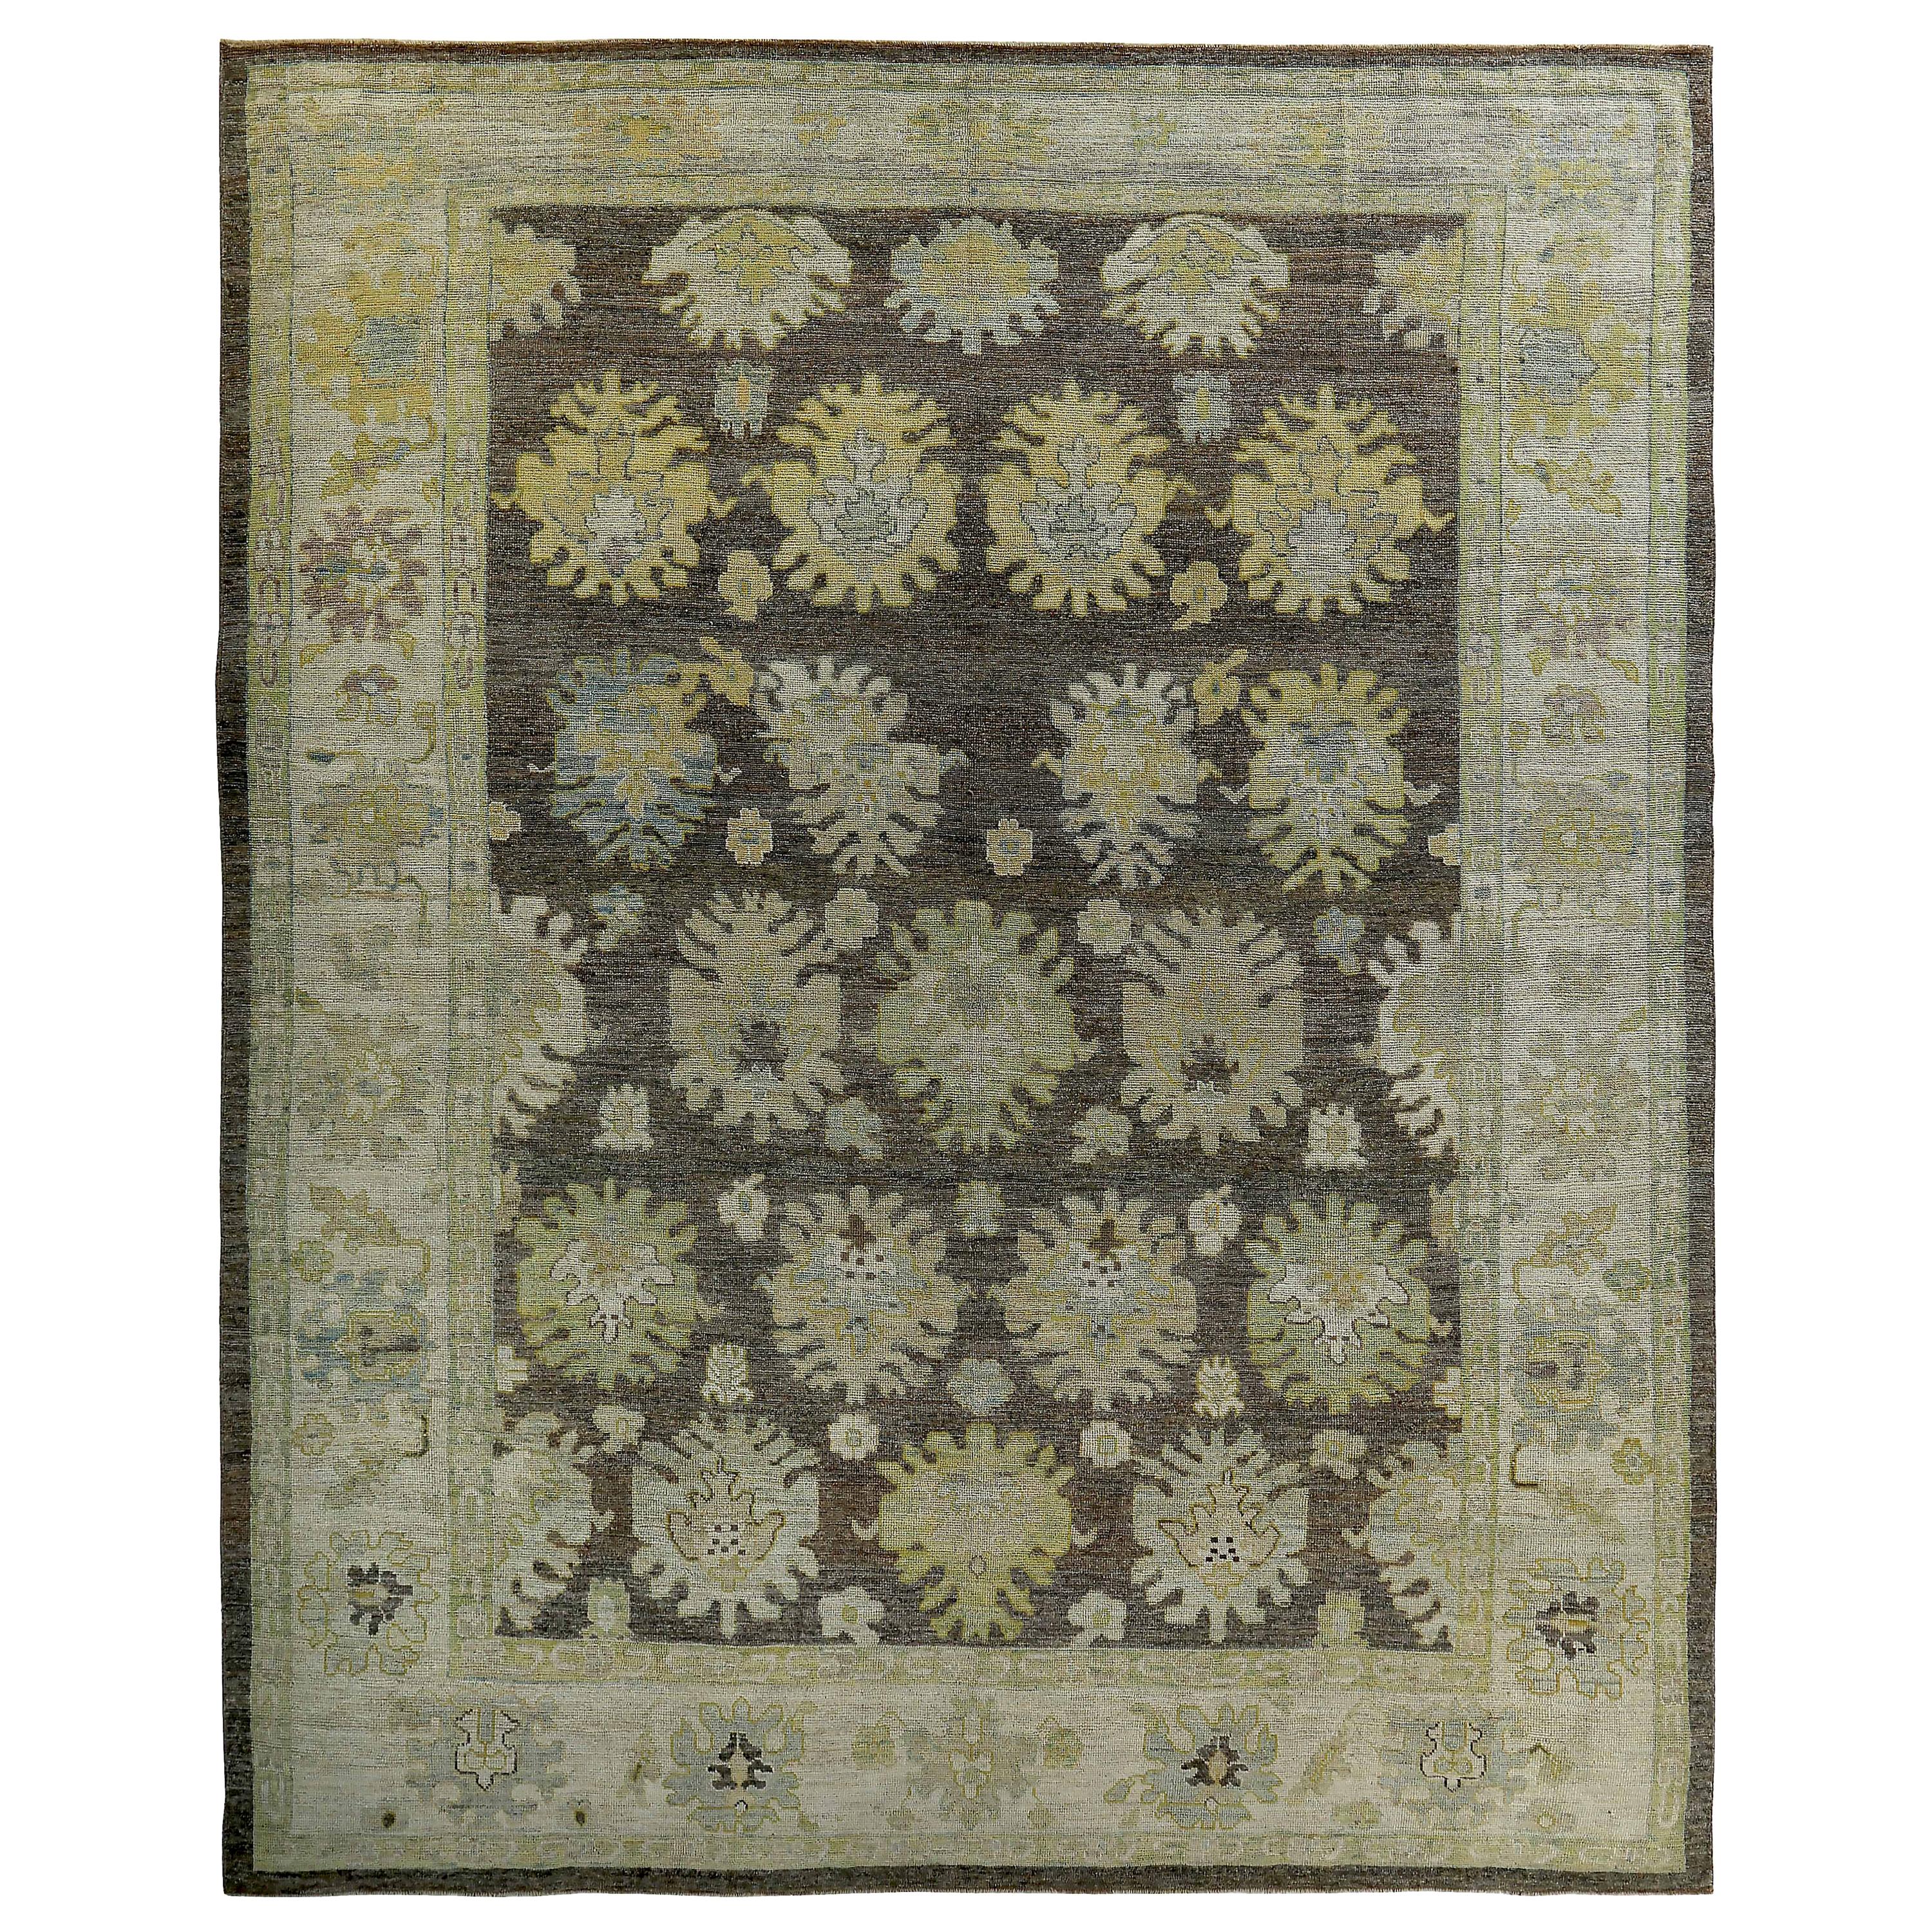 New Turkish Oushak Rug with Ivory and Gold Flower Heads on Brown Field